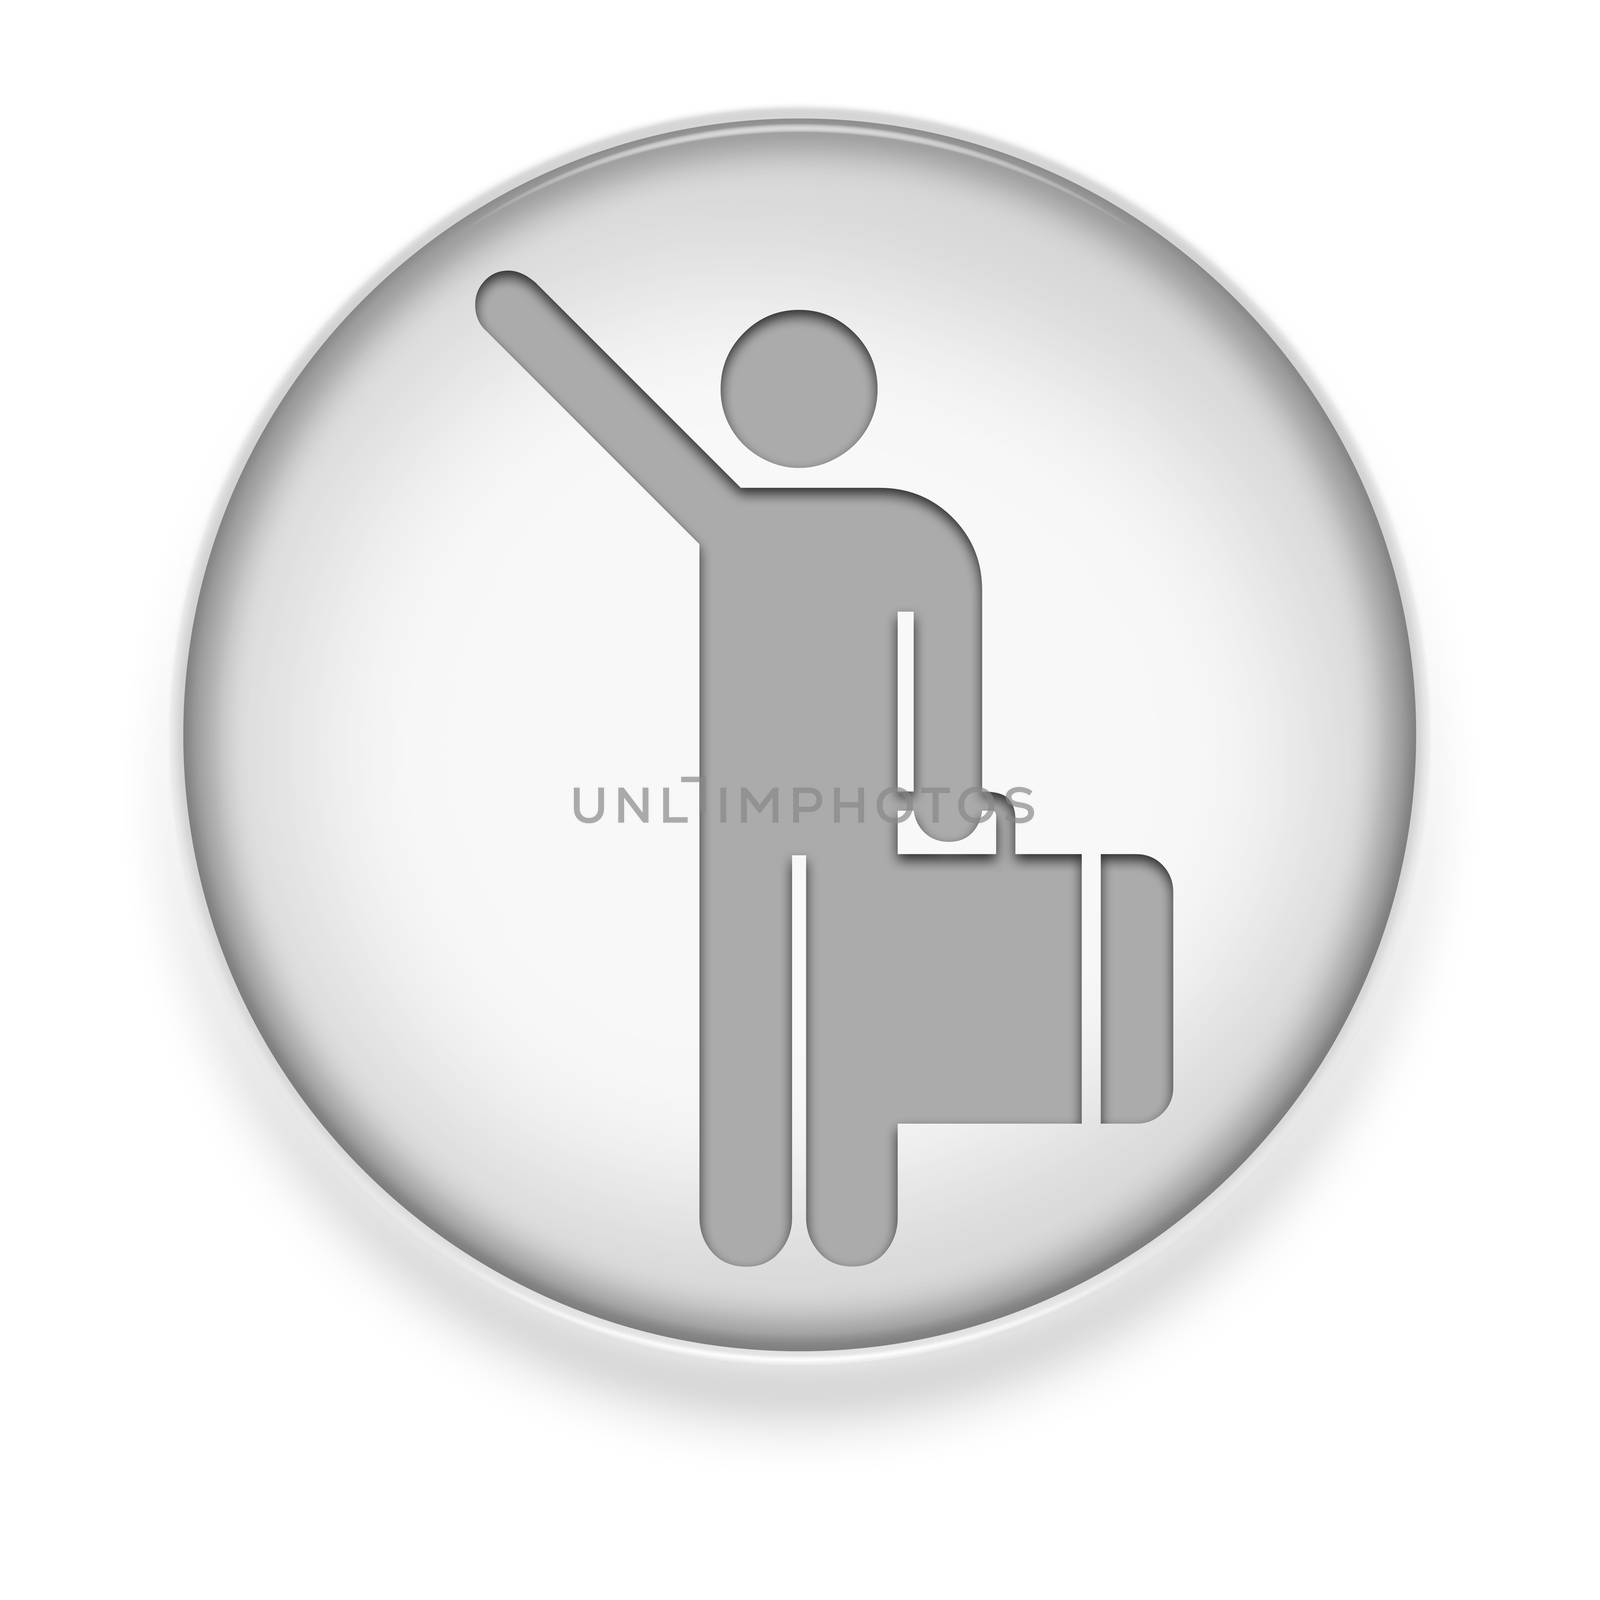 Icon, Button, Pictogram Arriving Flights by mindscanner